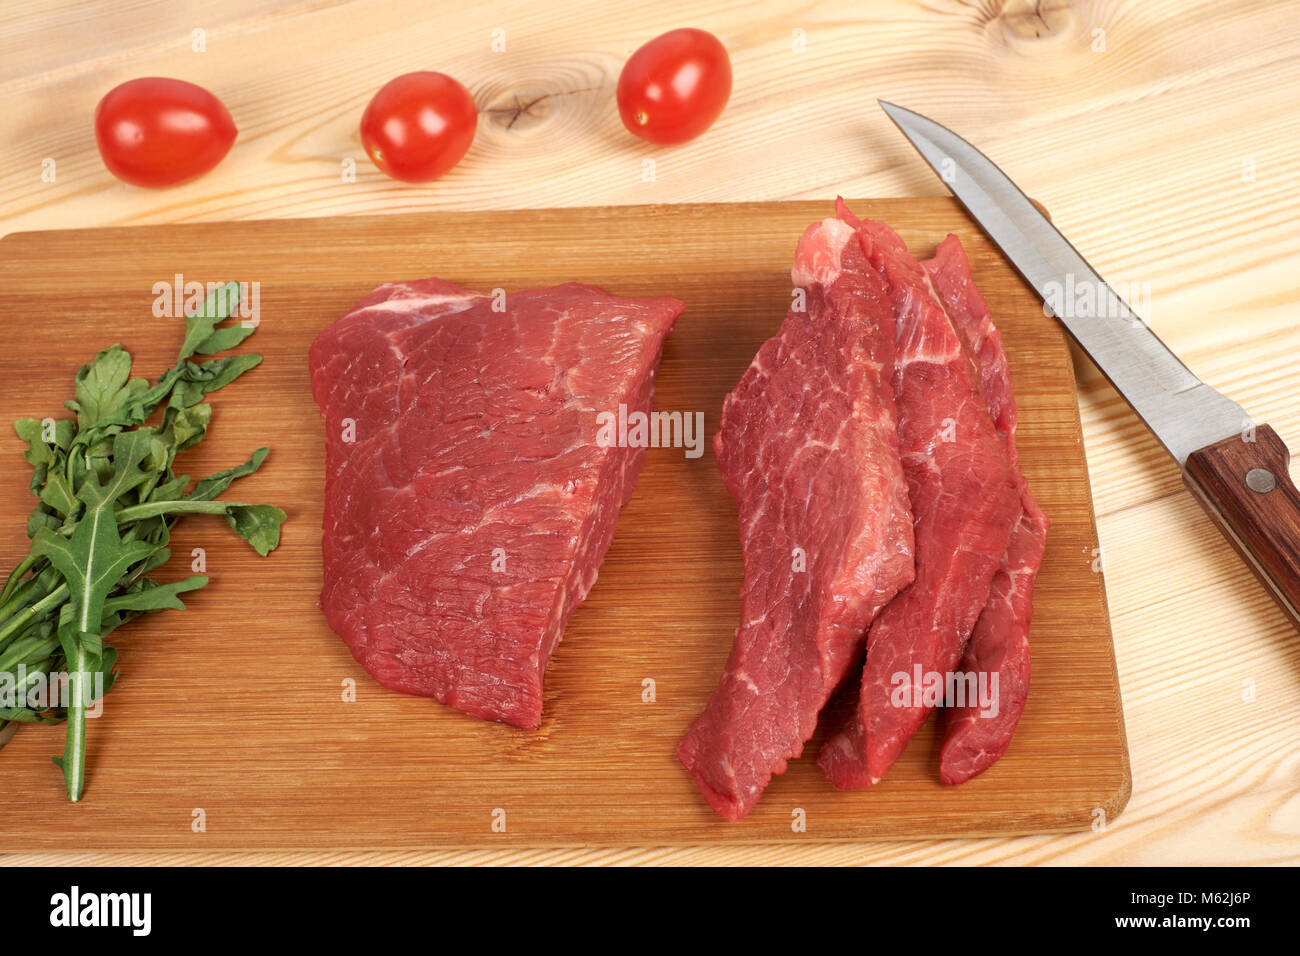 https://c8.alamy.com/comp/M62J6P/sliced-raw-beef-on-cutting-board-and-vegetables-M62J6P.jpg